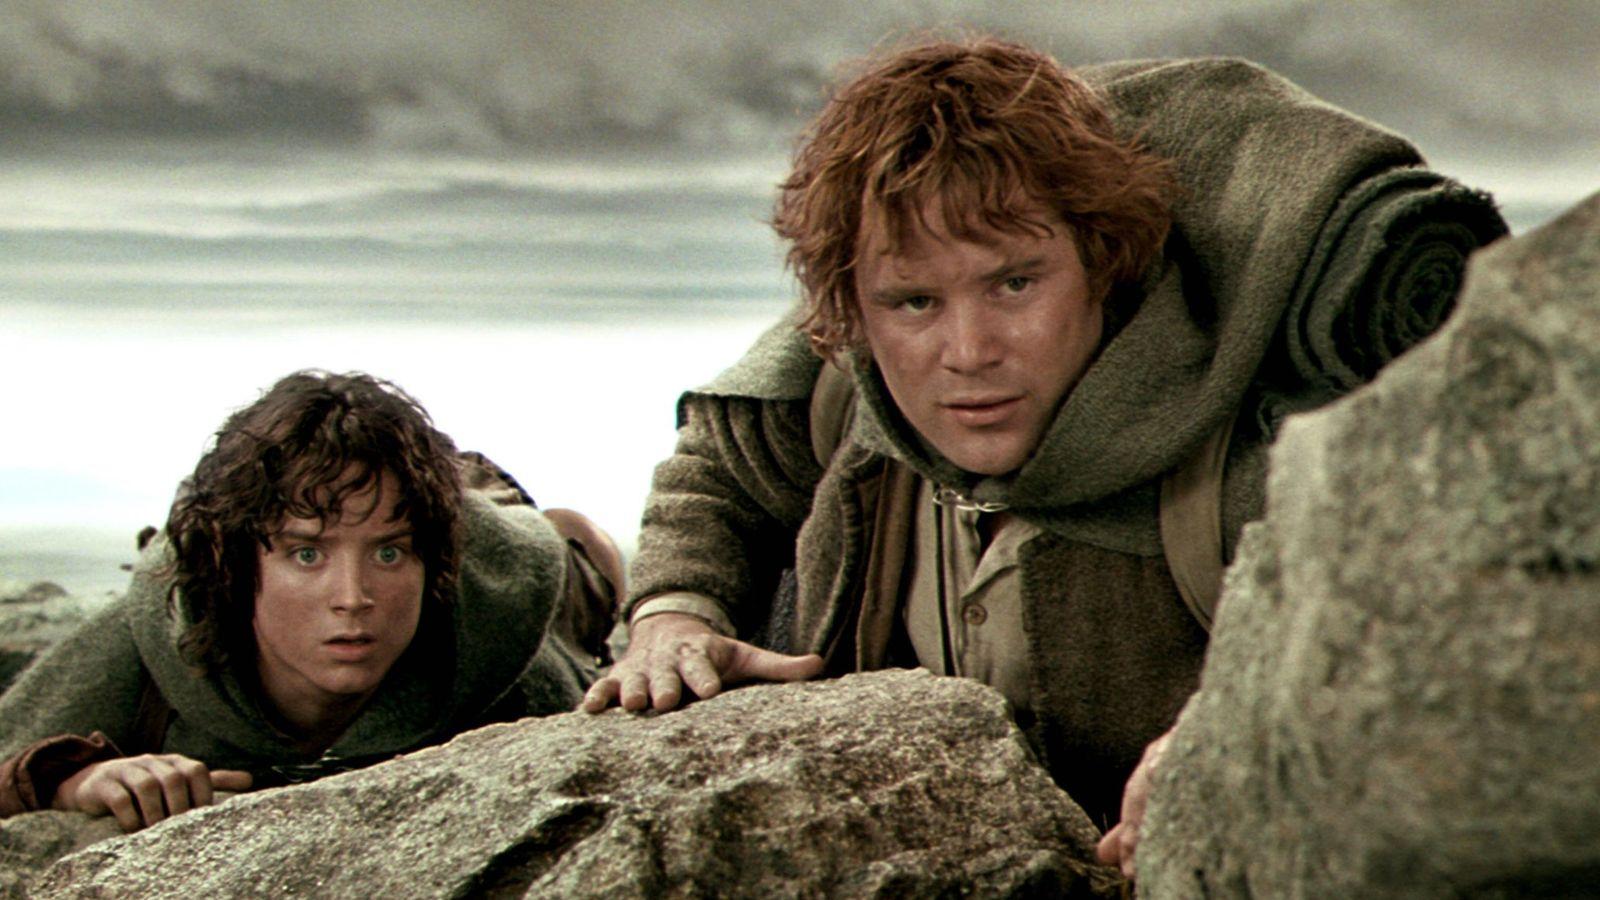 Frodo and Sam in The Lord of the Rings: The Two Towers.